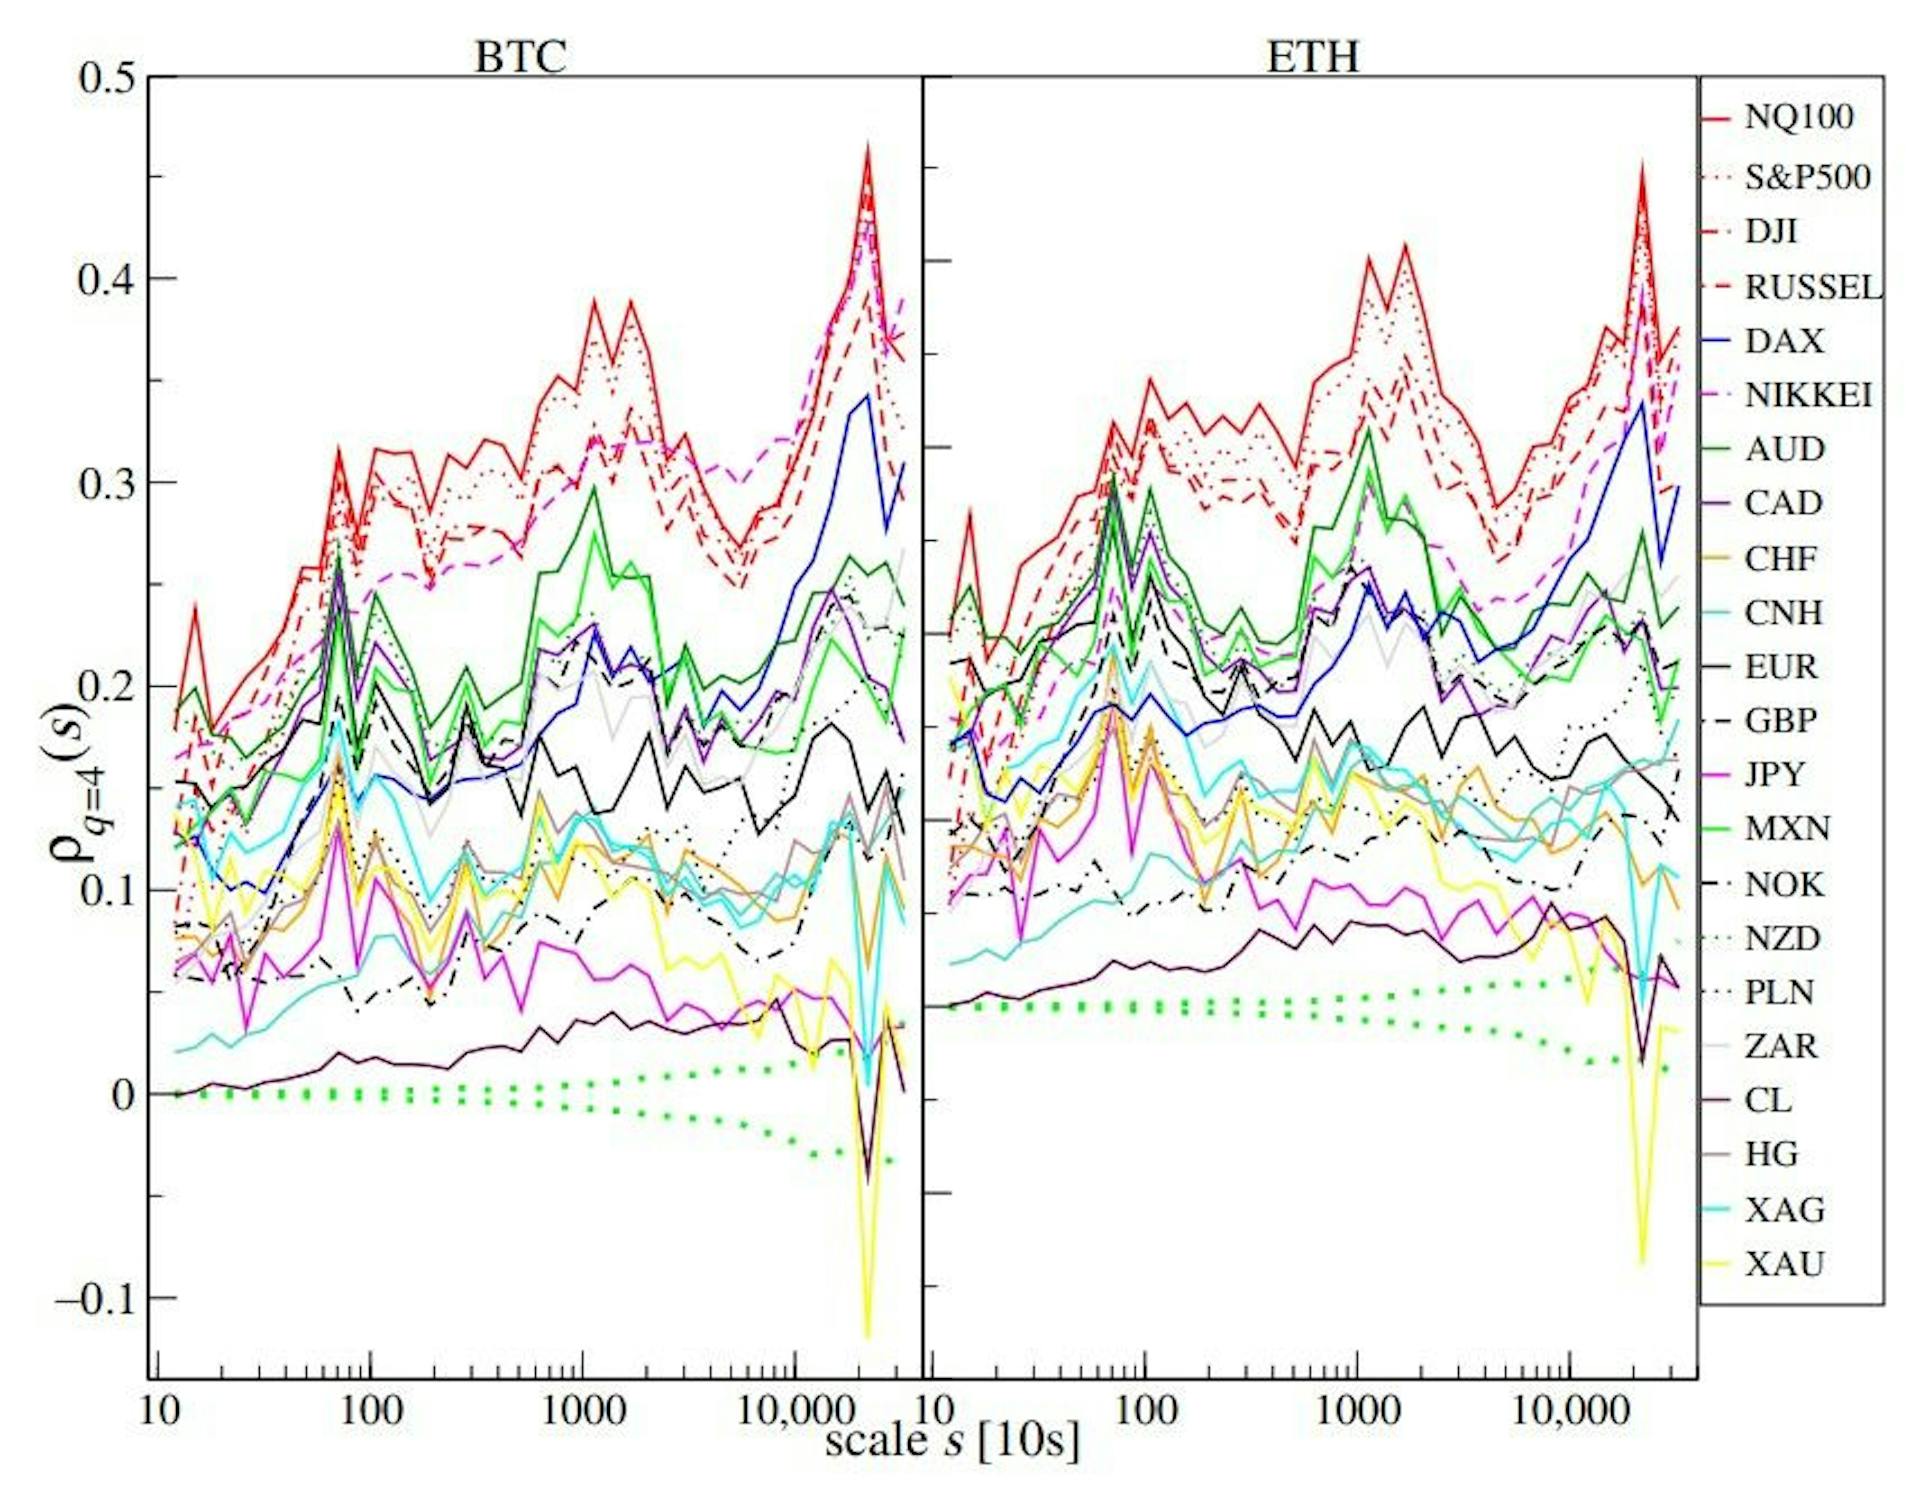 Figure 4. The q-dependent detrended cross-correlation coefficient ρq(s) between BTC/USD (right) and ETH/USD (left) versus selected traditional financial instruments for q = 4, which amplifies the large return contributions. ρq(s) for a range of time scales from s = 12 (2 min) to s = 32, 000 (∼4 trading days) is presented based on data from January to October 2022. The statistically insignificant correlation region (dotted green line) is given as ± standard deviation of ρq(s) calculated from 100 independent realizations of the shuffled time series